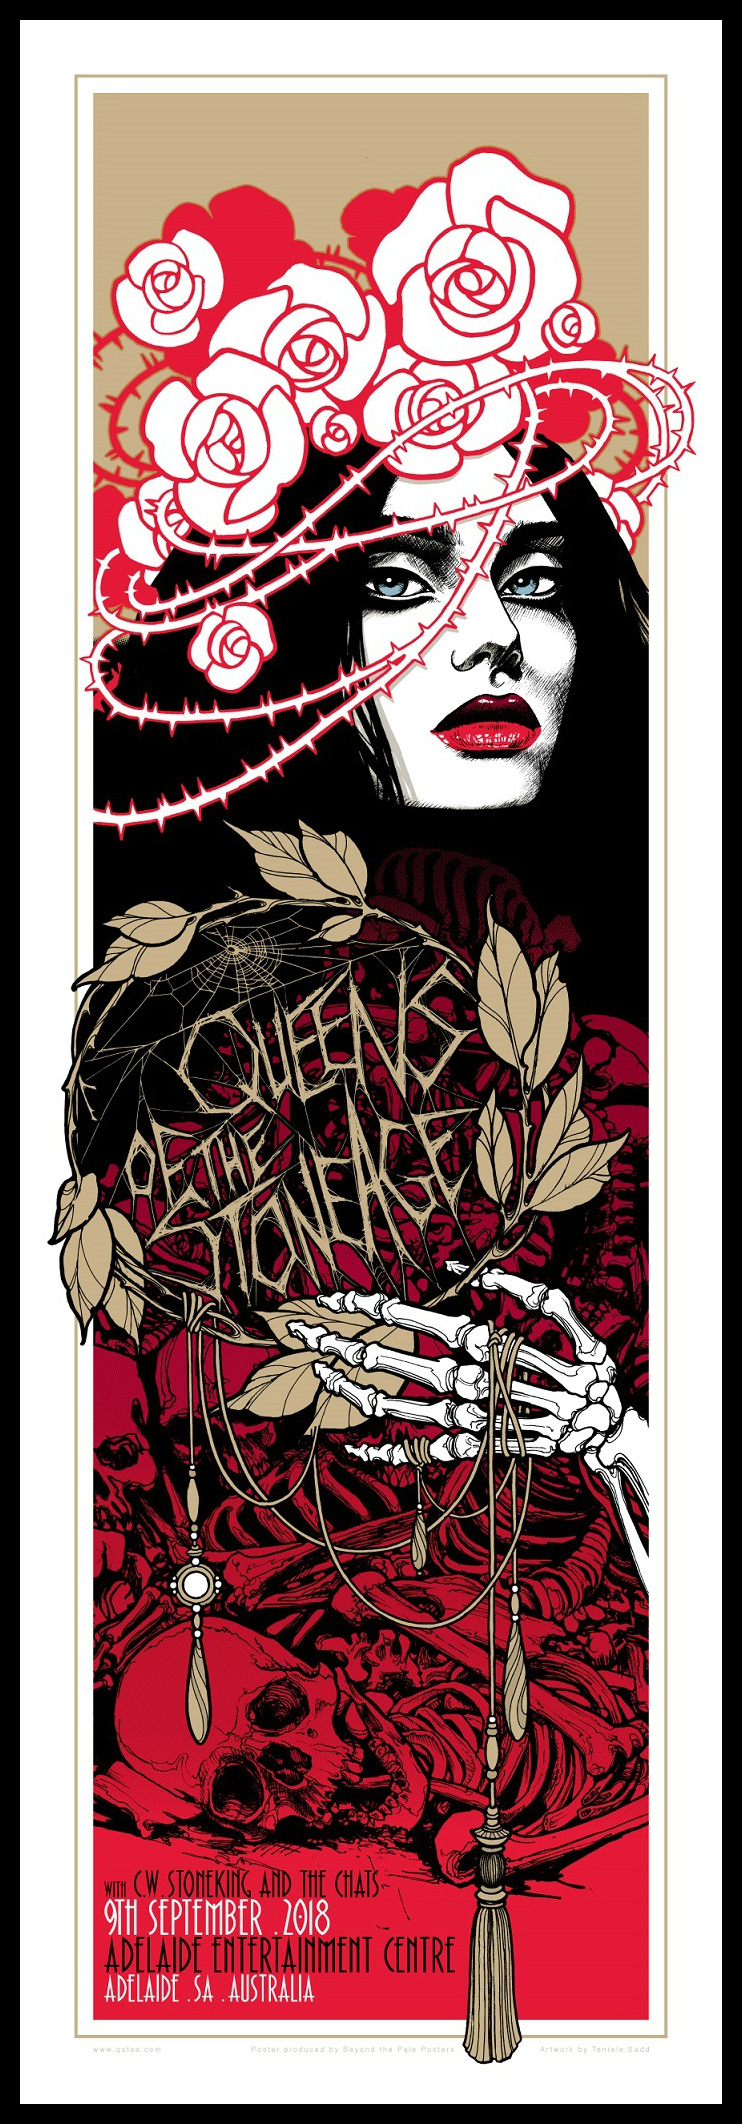 Queens of the Stone Age | 411posters